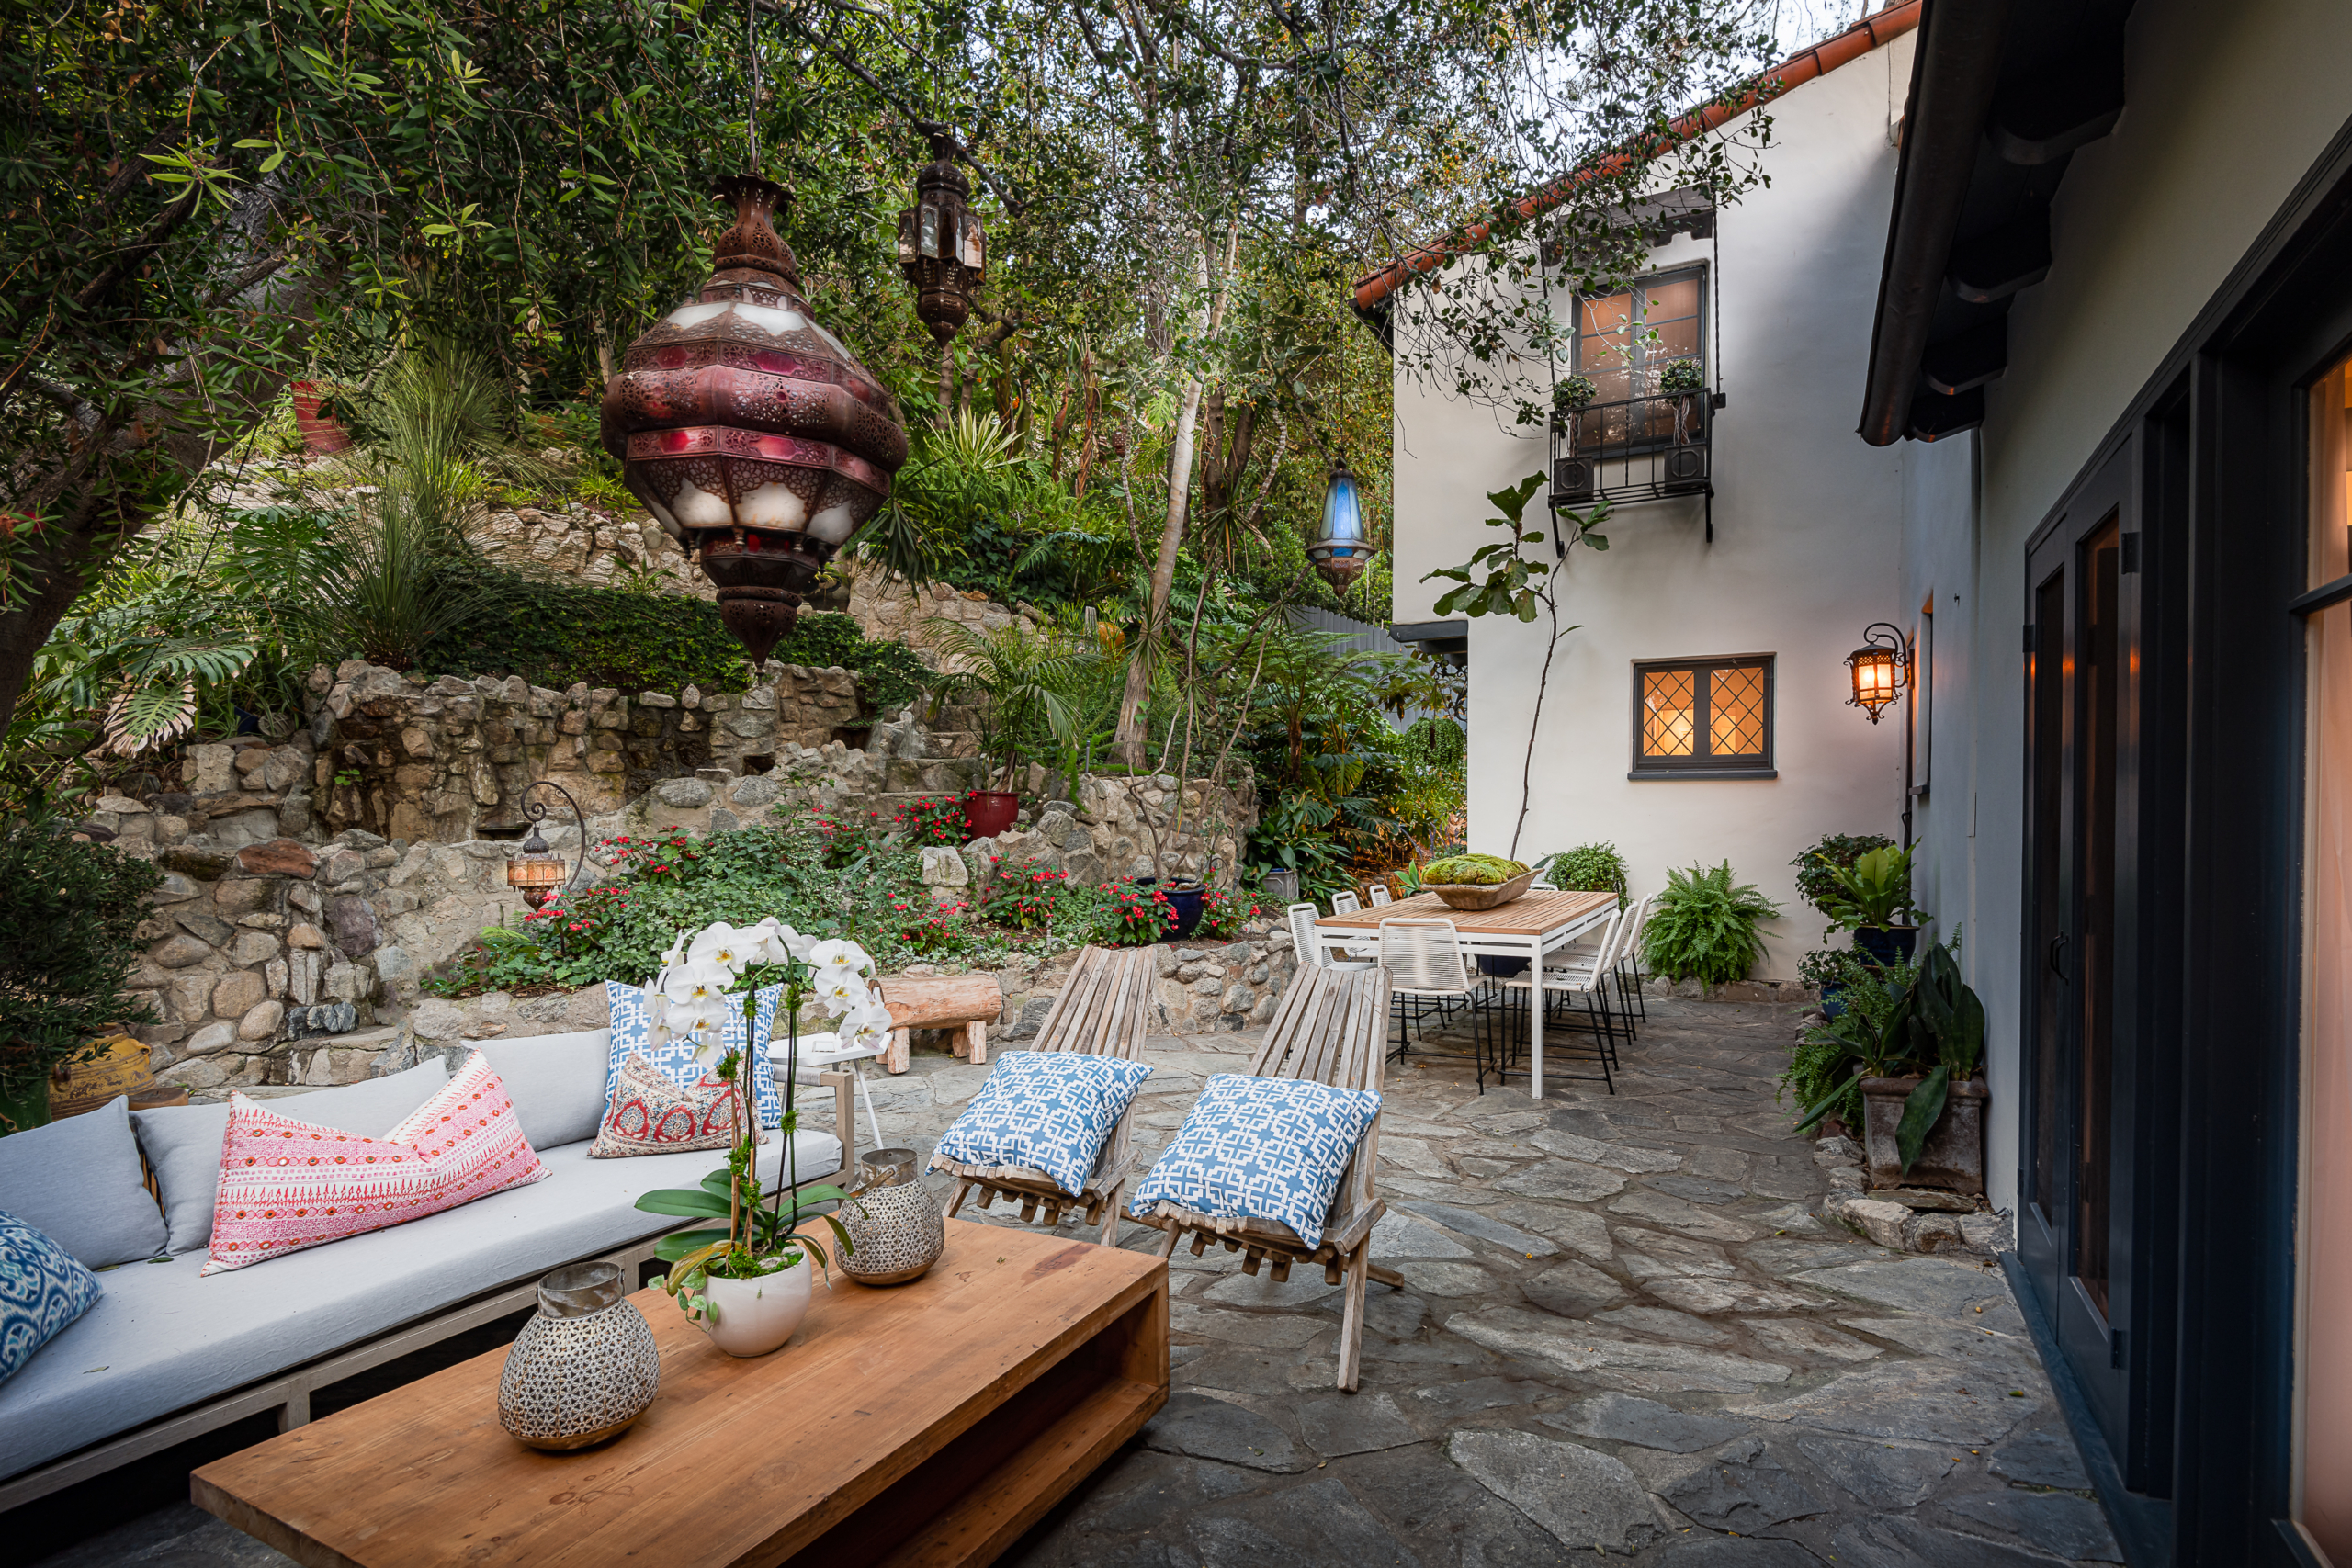 The stunning Moroccan lantern-lit entertainer's yard is ideal for al-fresco Dining, the hillside gardens and fountain beckon the avid gardener and all in search of a meditative retreat.